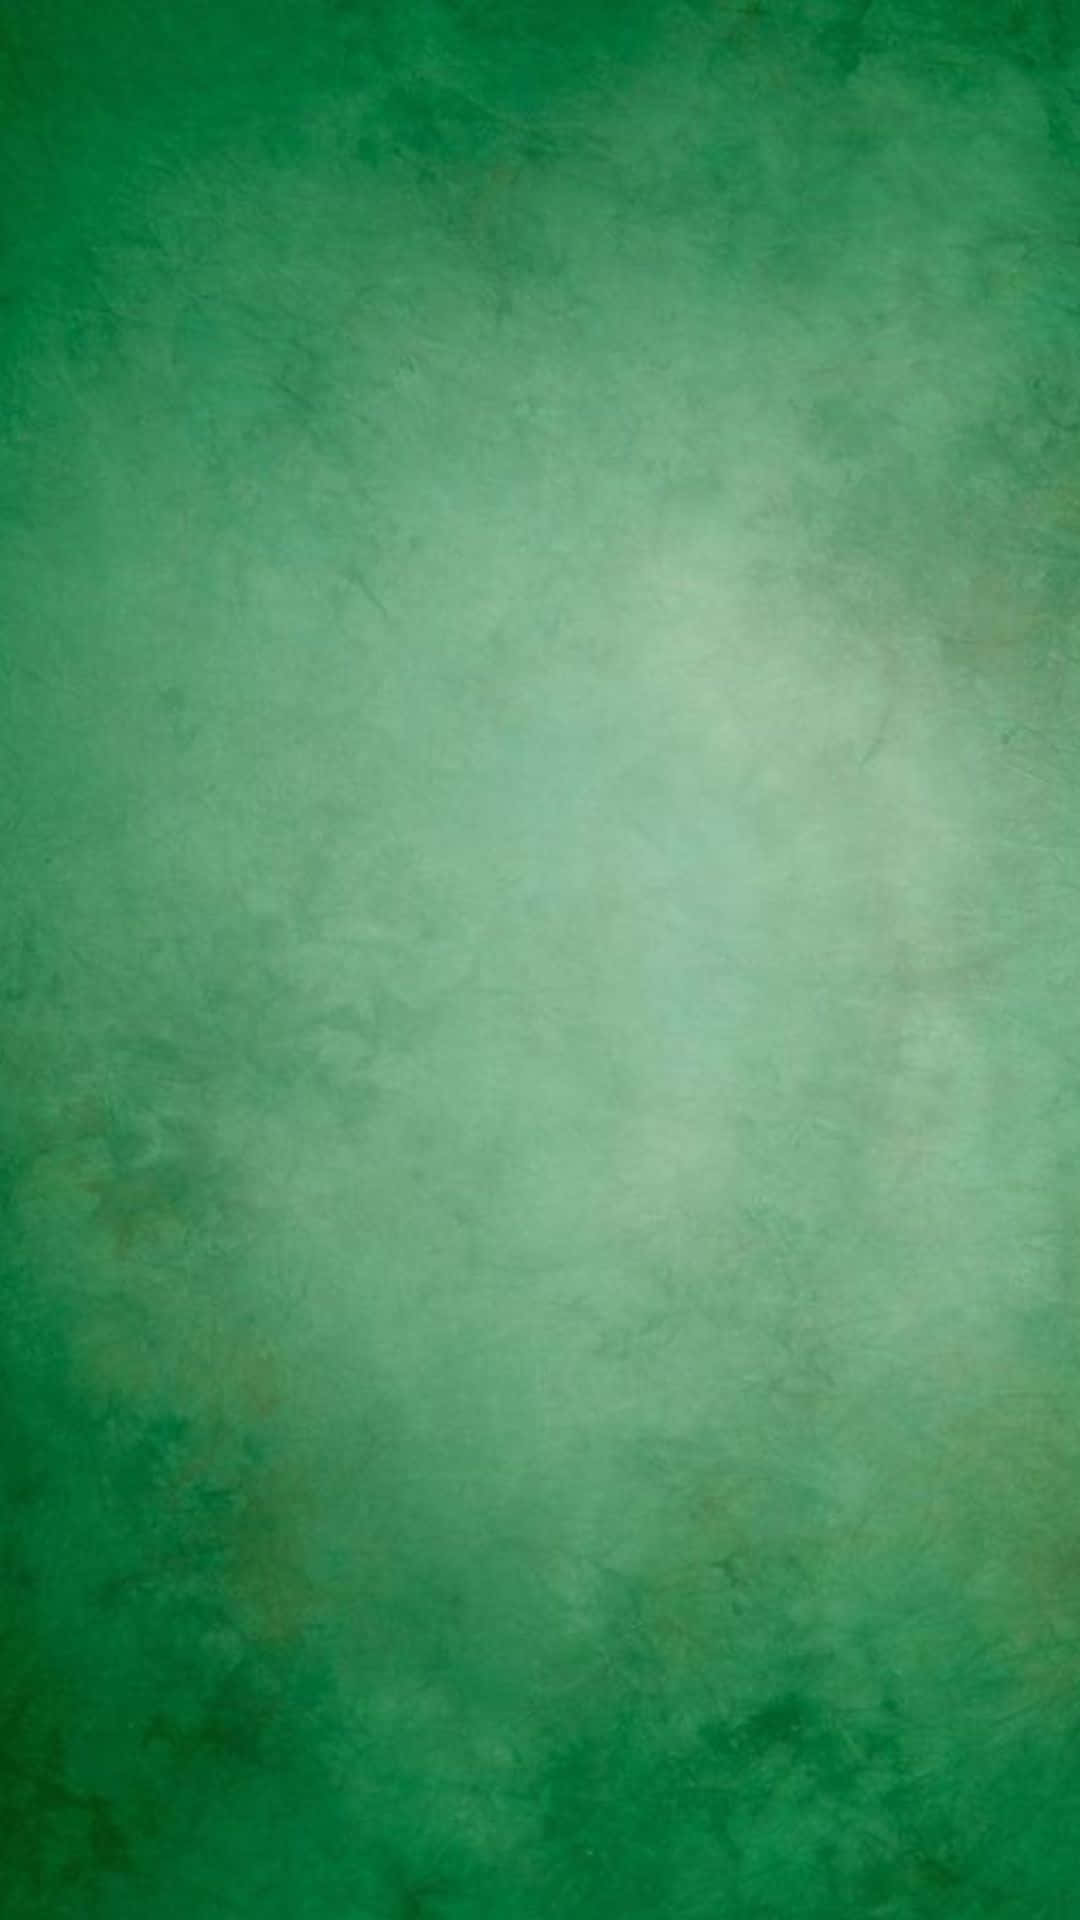 Green Grunge Background With A Textured Surface